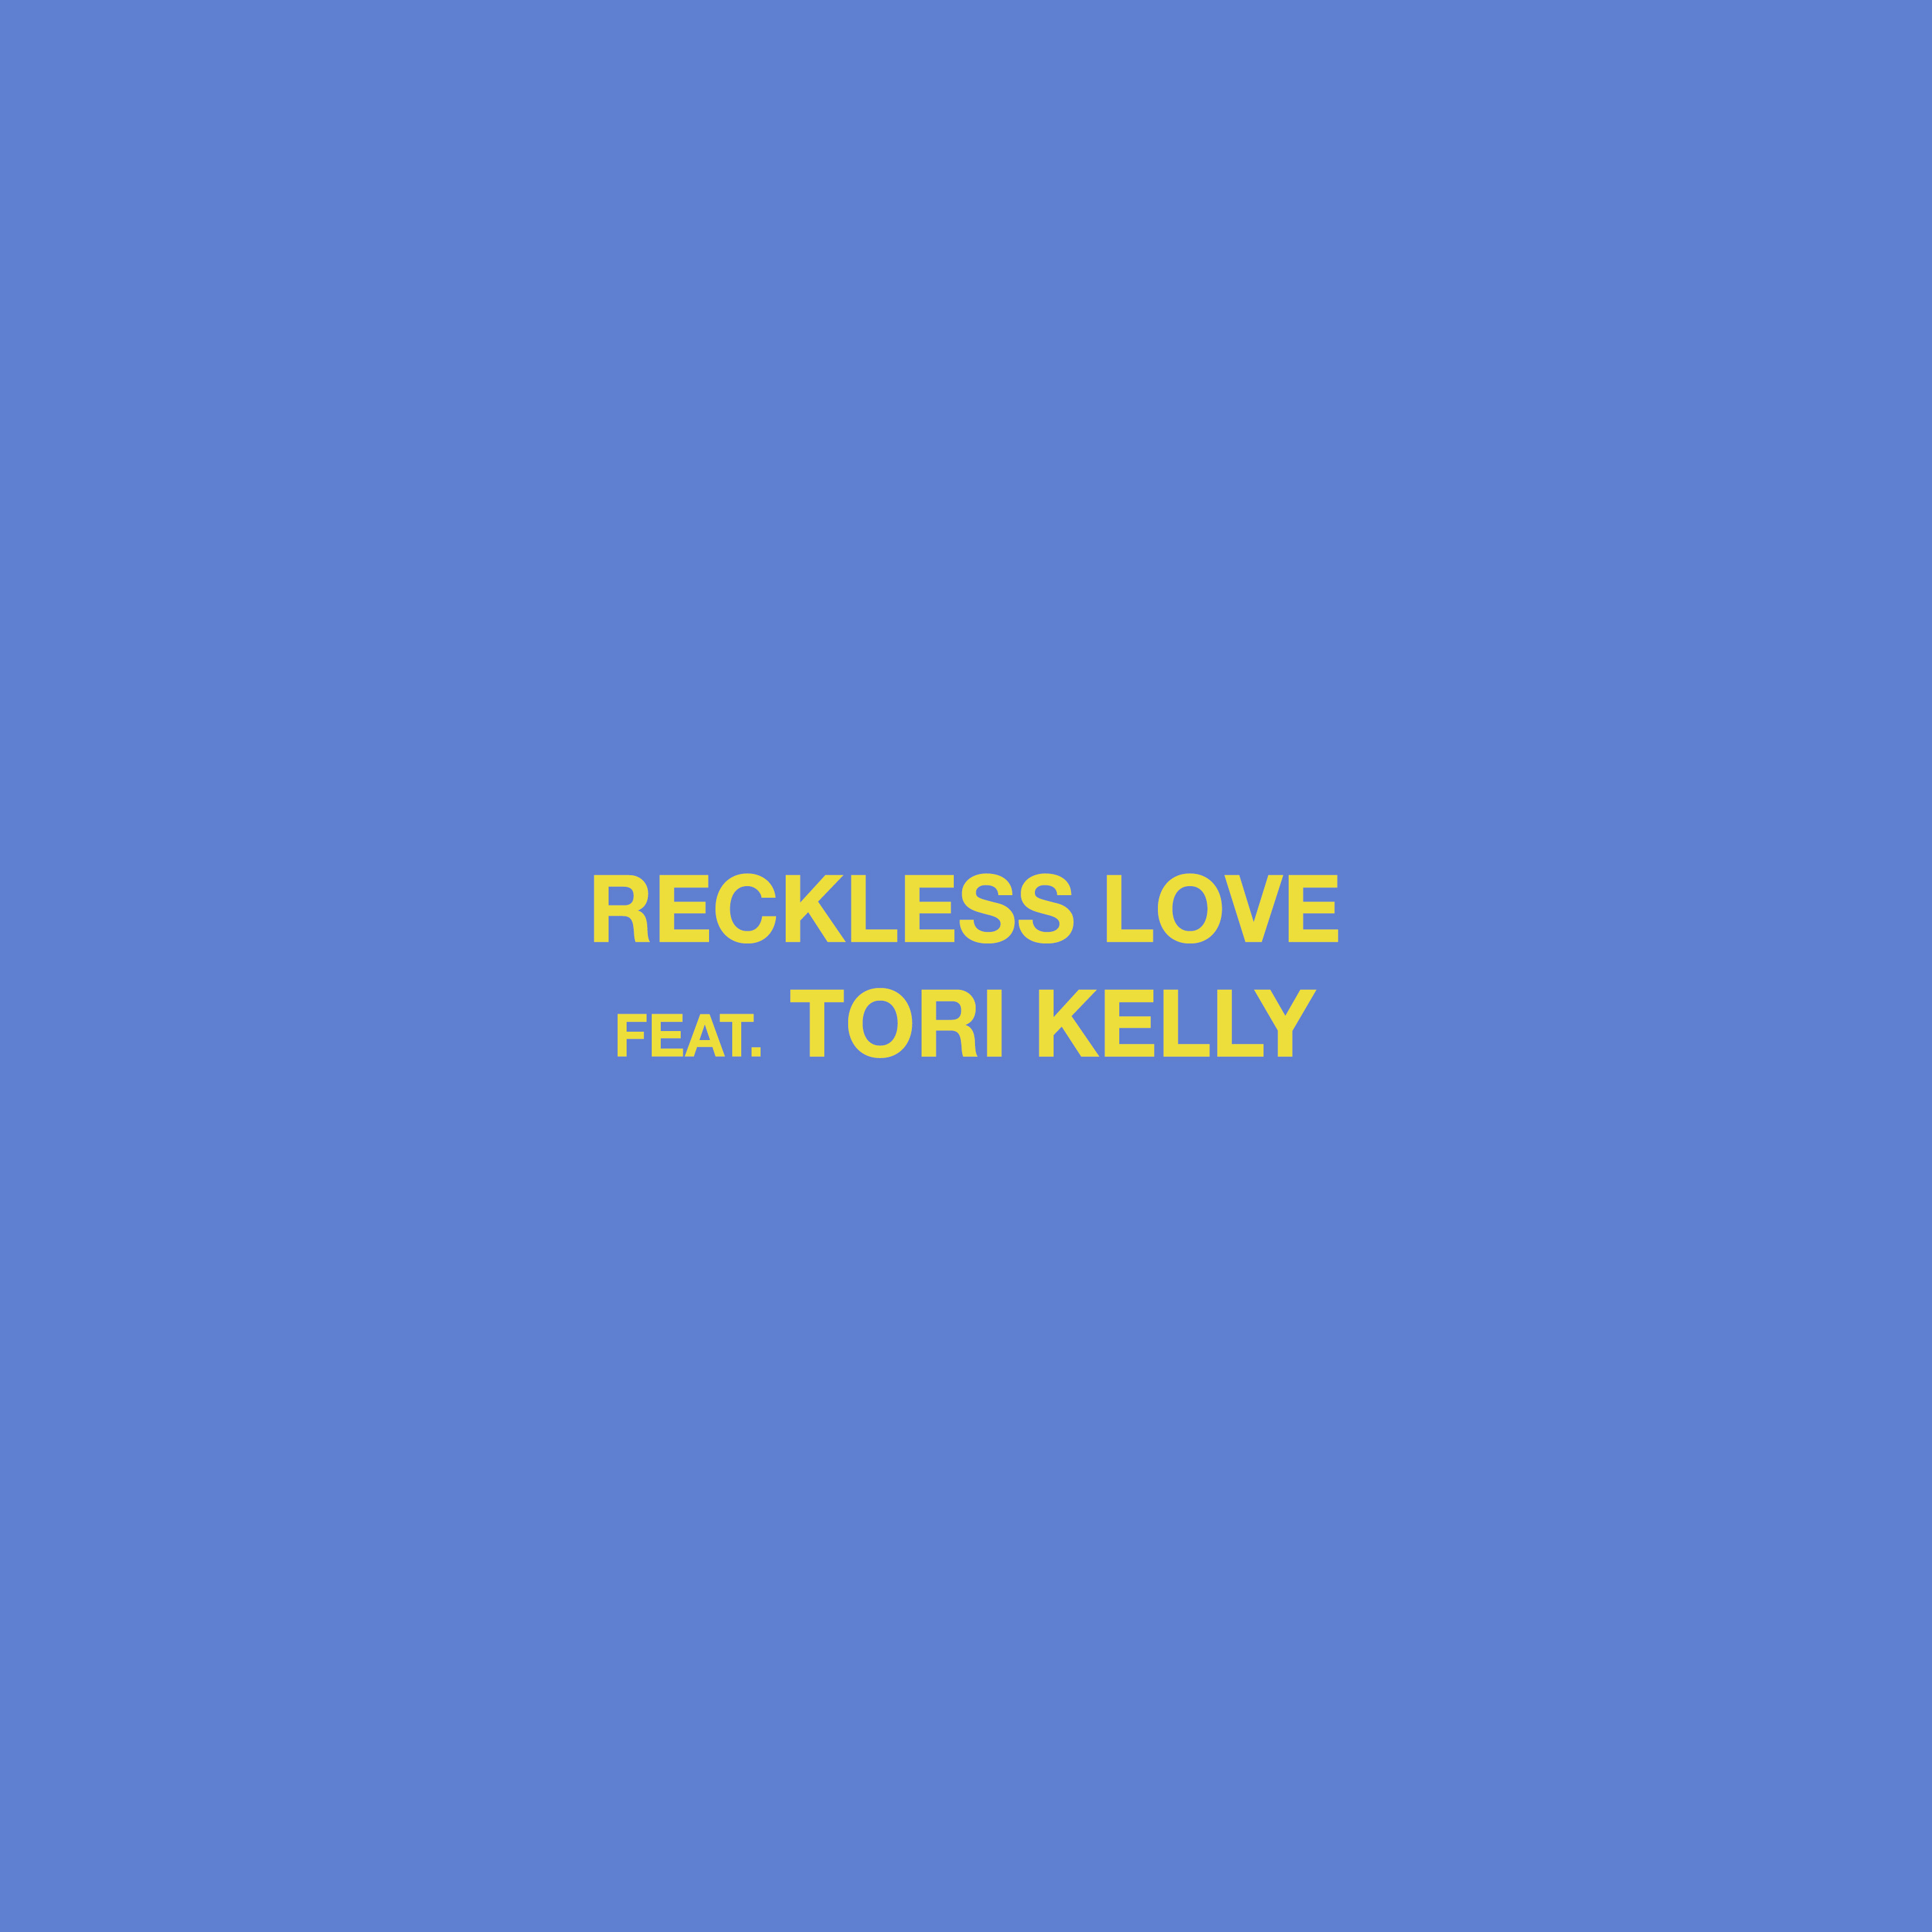 "Reckless Love" feat. Tori Kelly